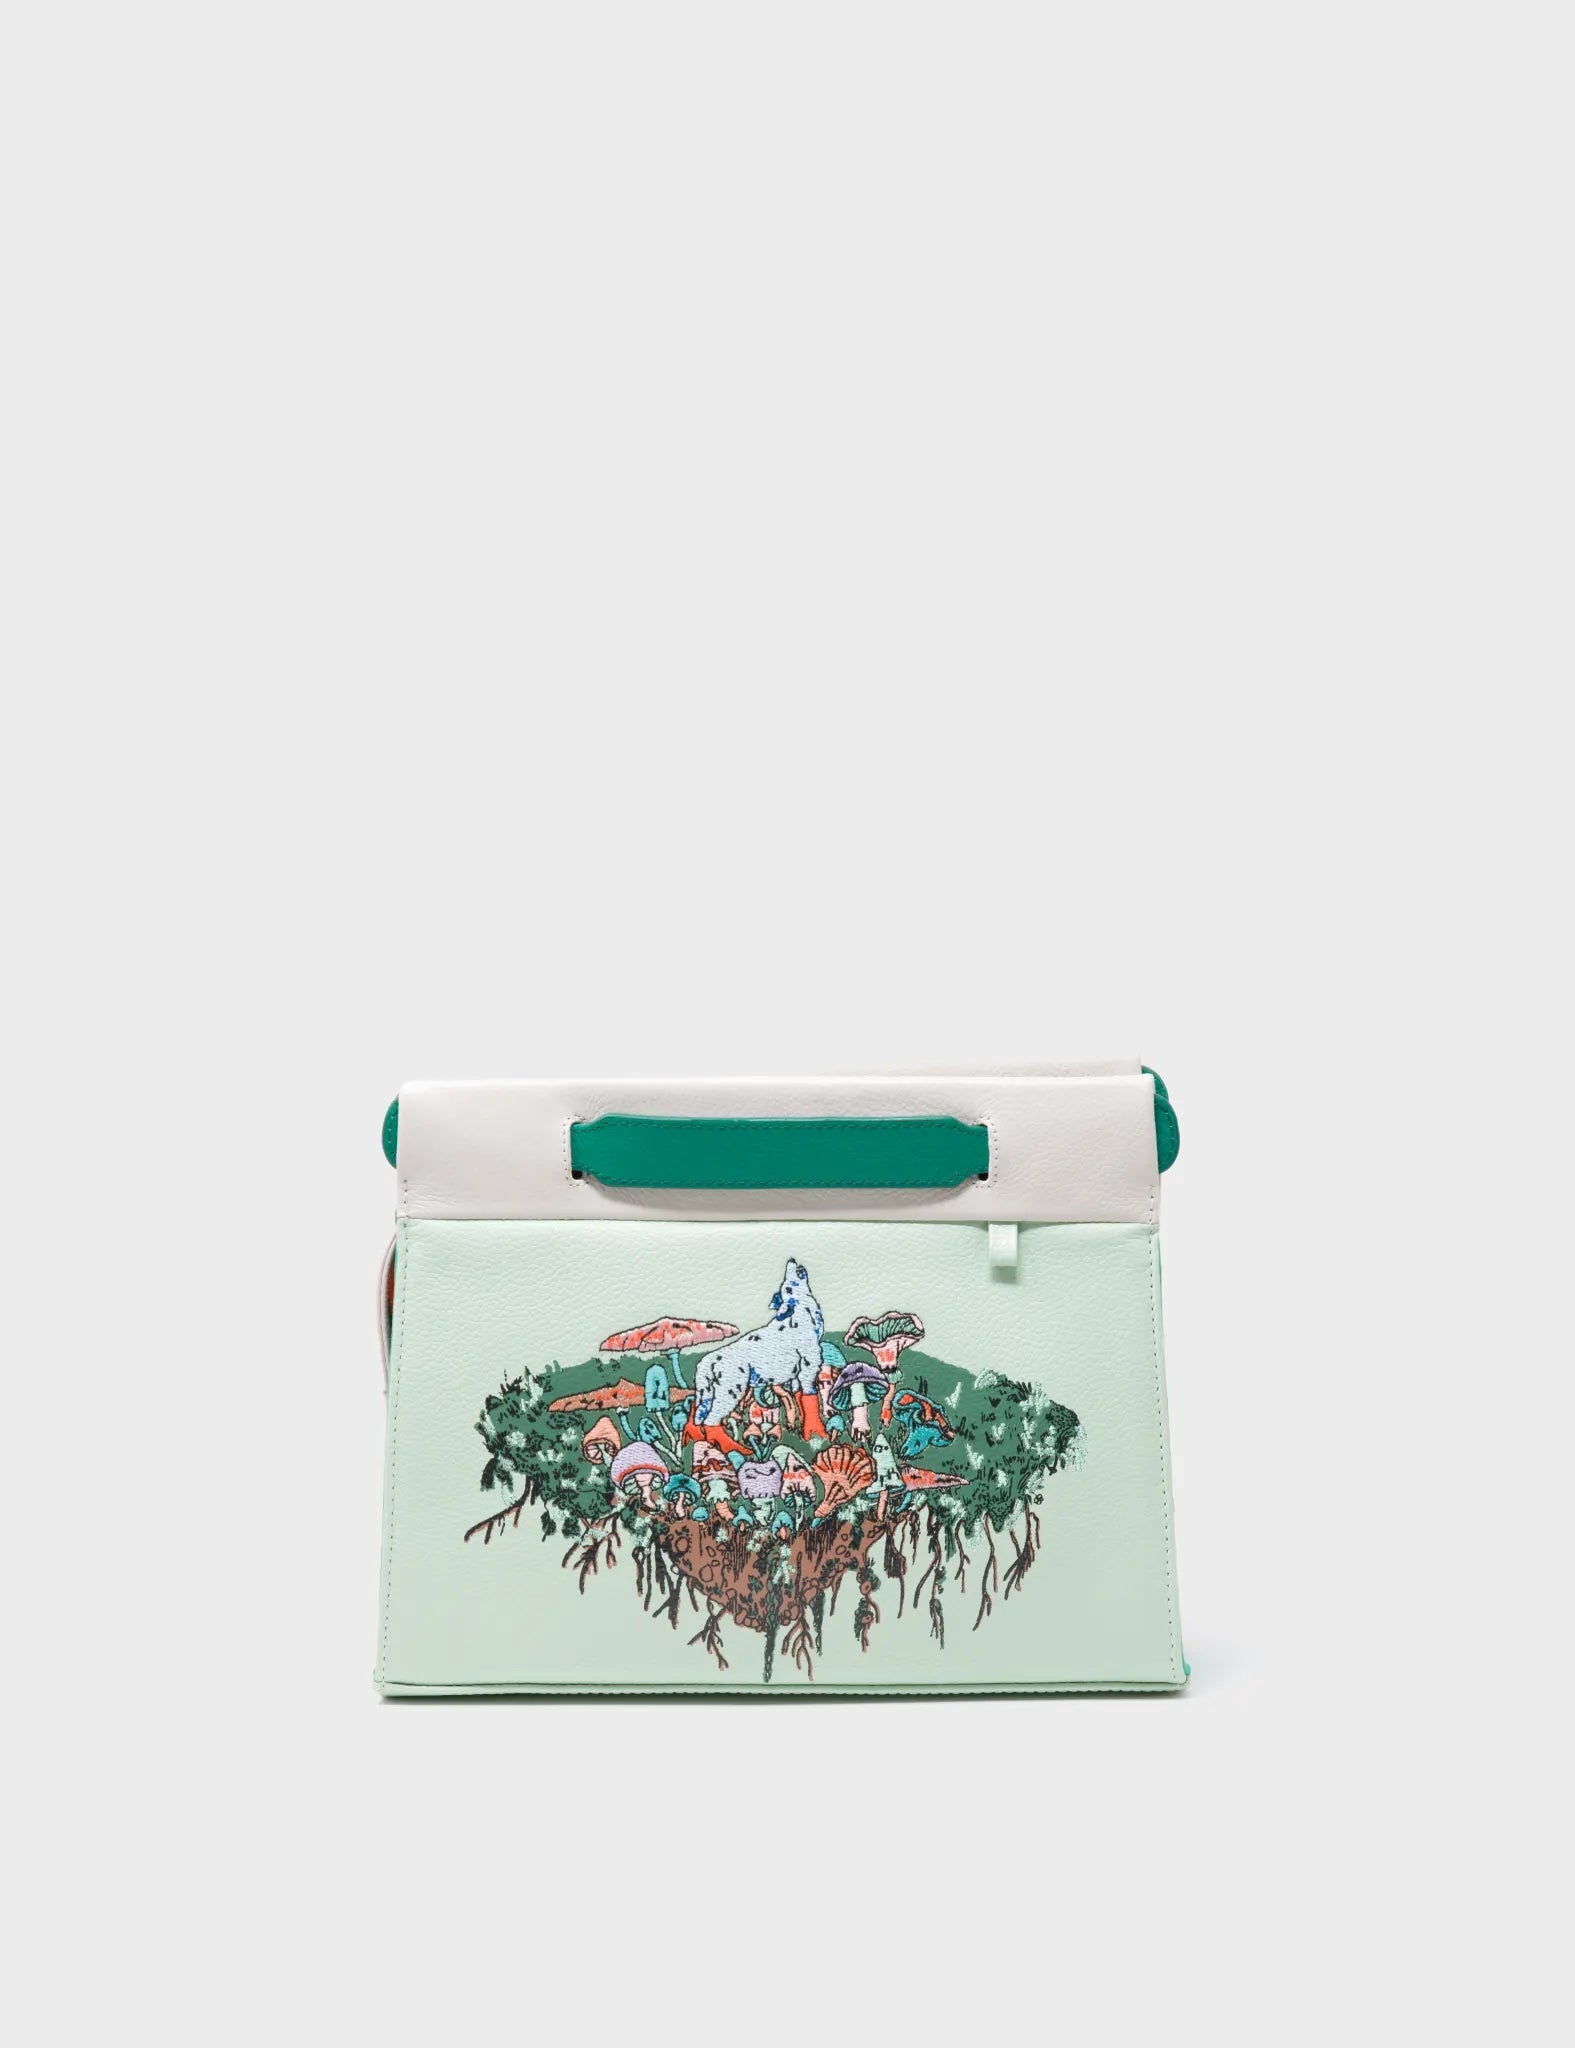 Crossbody Spray Green Leather Bag - Wolf and Fungi Embroidery - Front 